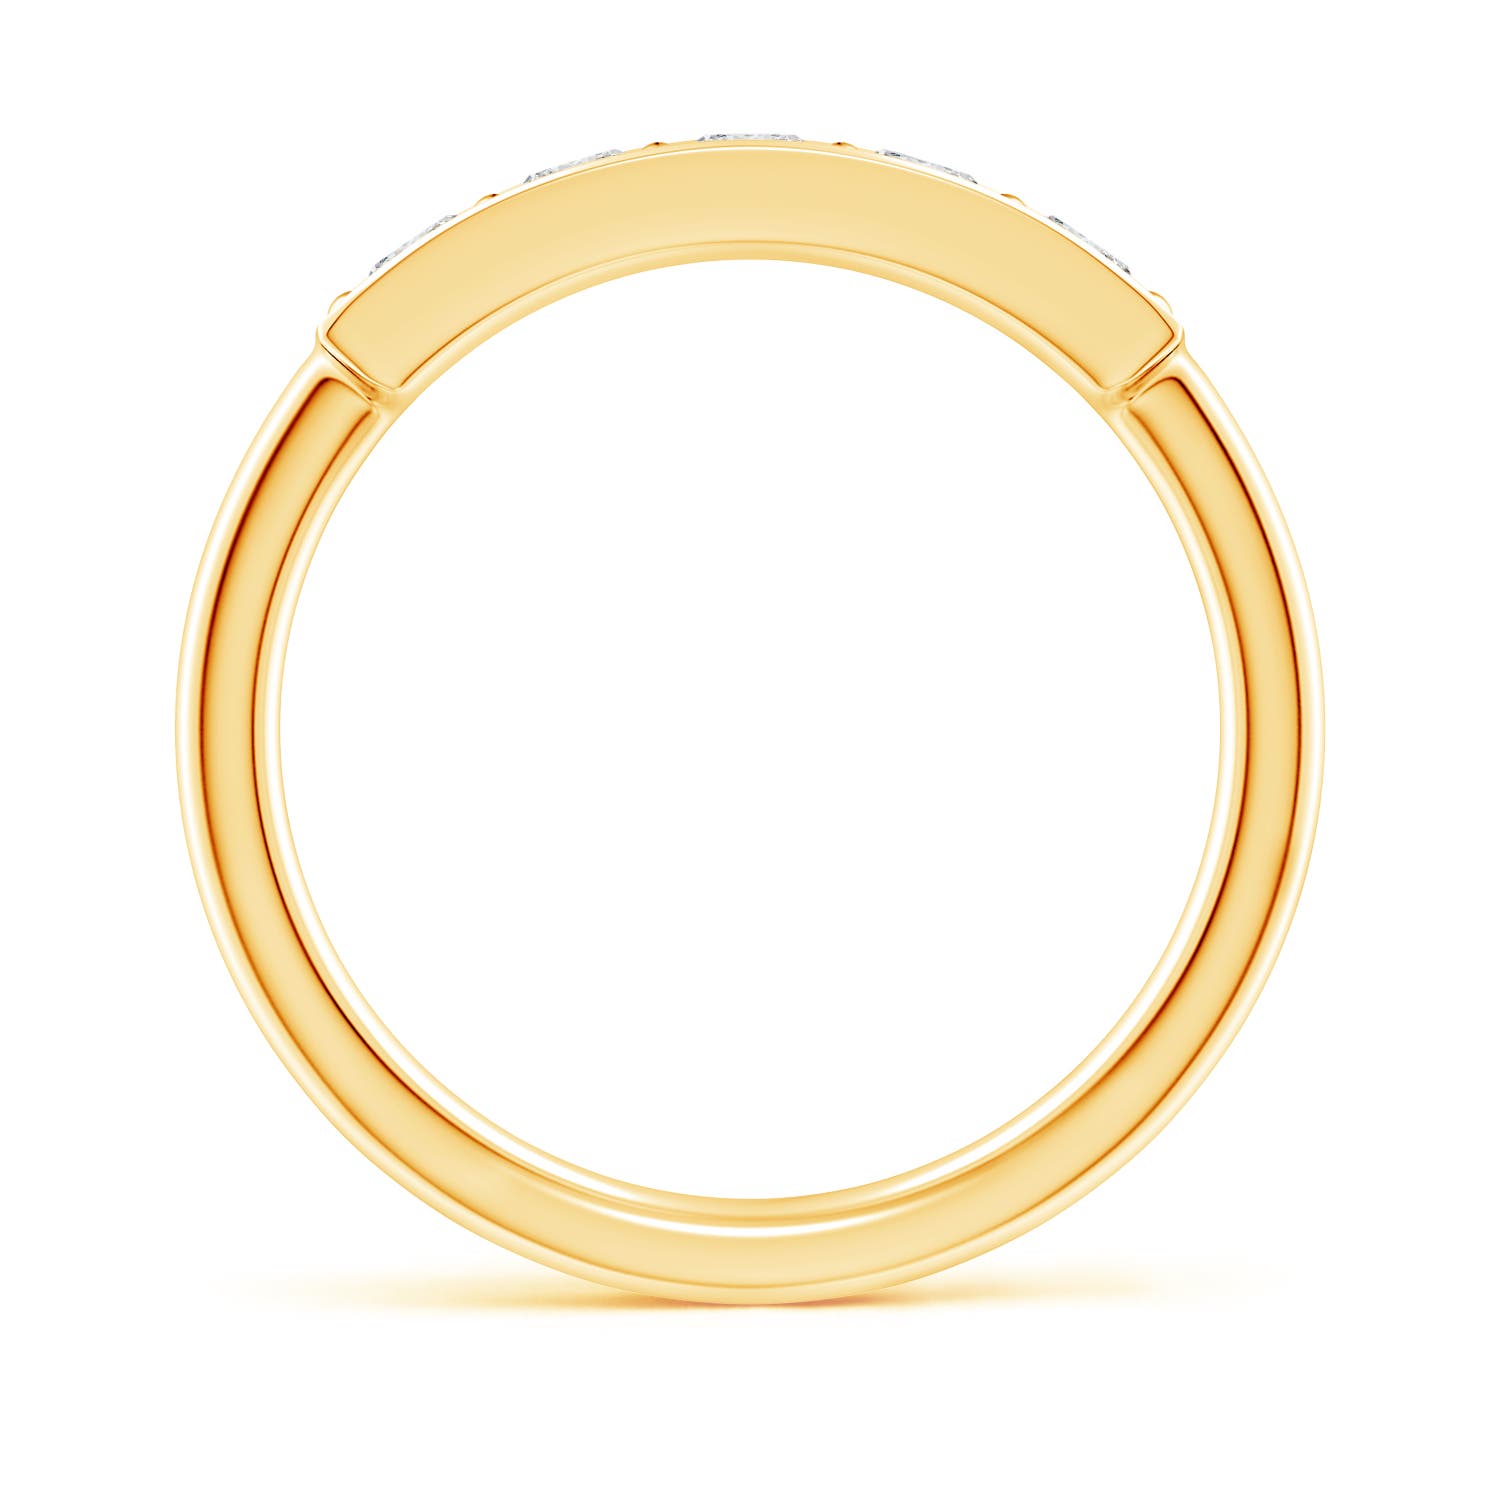 H, SI2 / 0.53 CT / 14 KT Yellow Gold